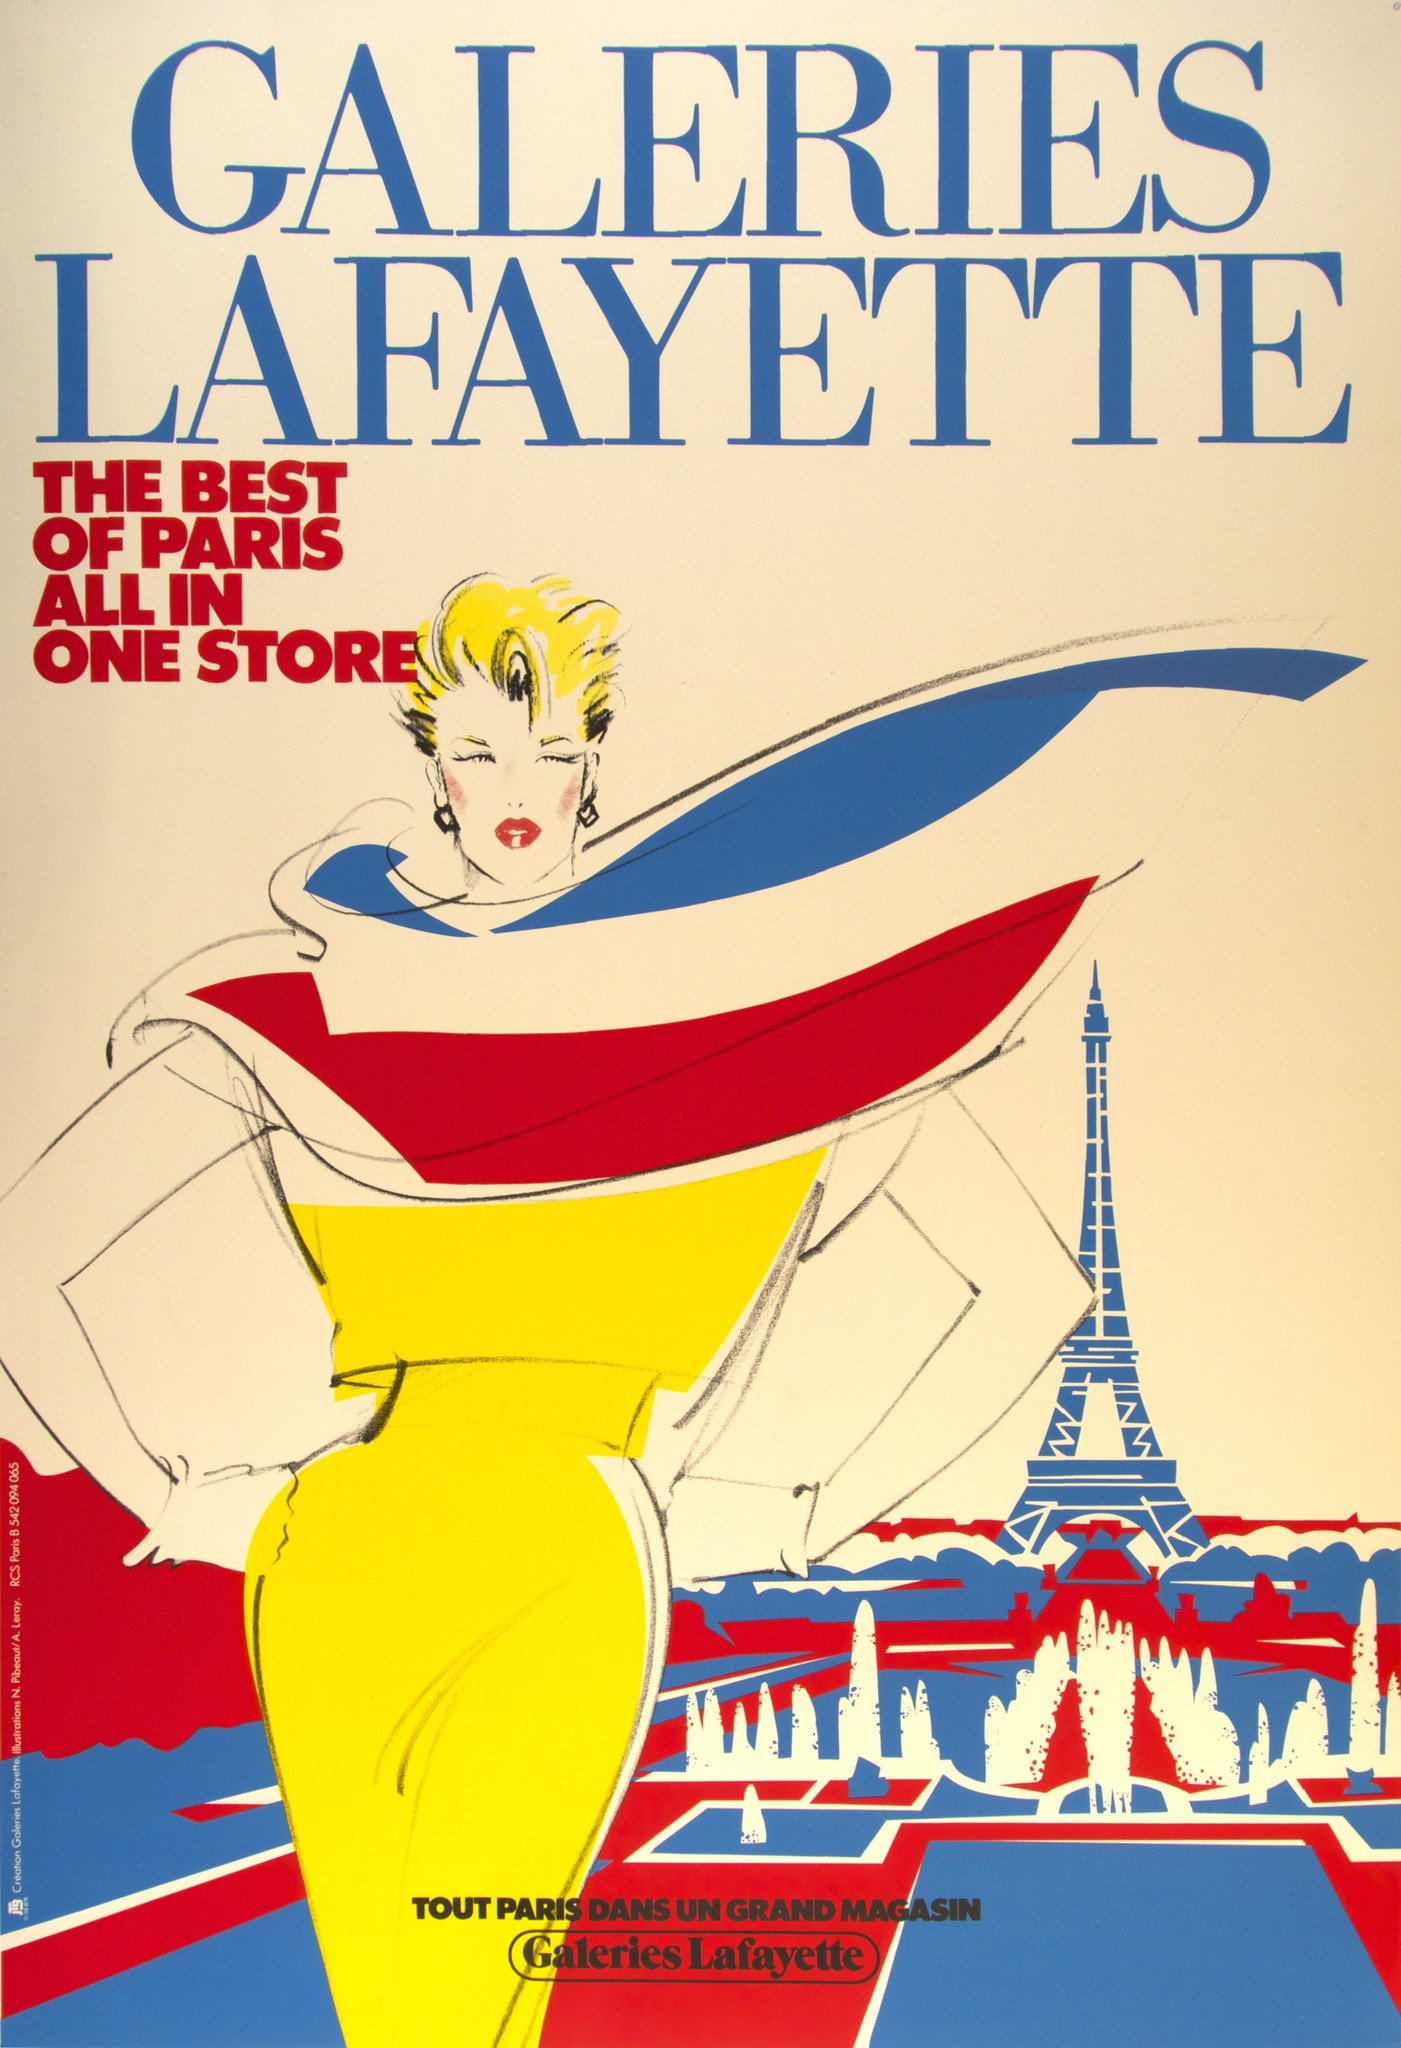 GALLERIES LAFAYETTE, original oversize poster by R. Cieslewicz. Size: 46.5" x 68". Archival linen backed original 1984 lithograph; ready to frame. This artist work in this image is very similar to Rene Gruau.